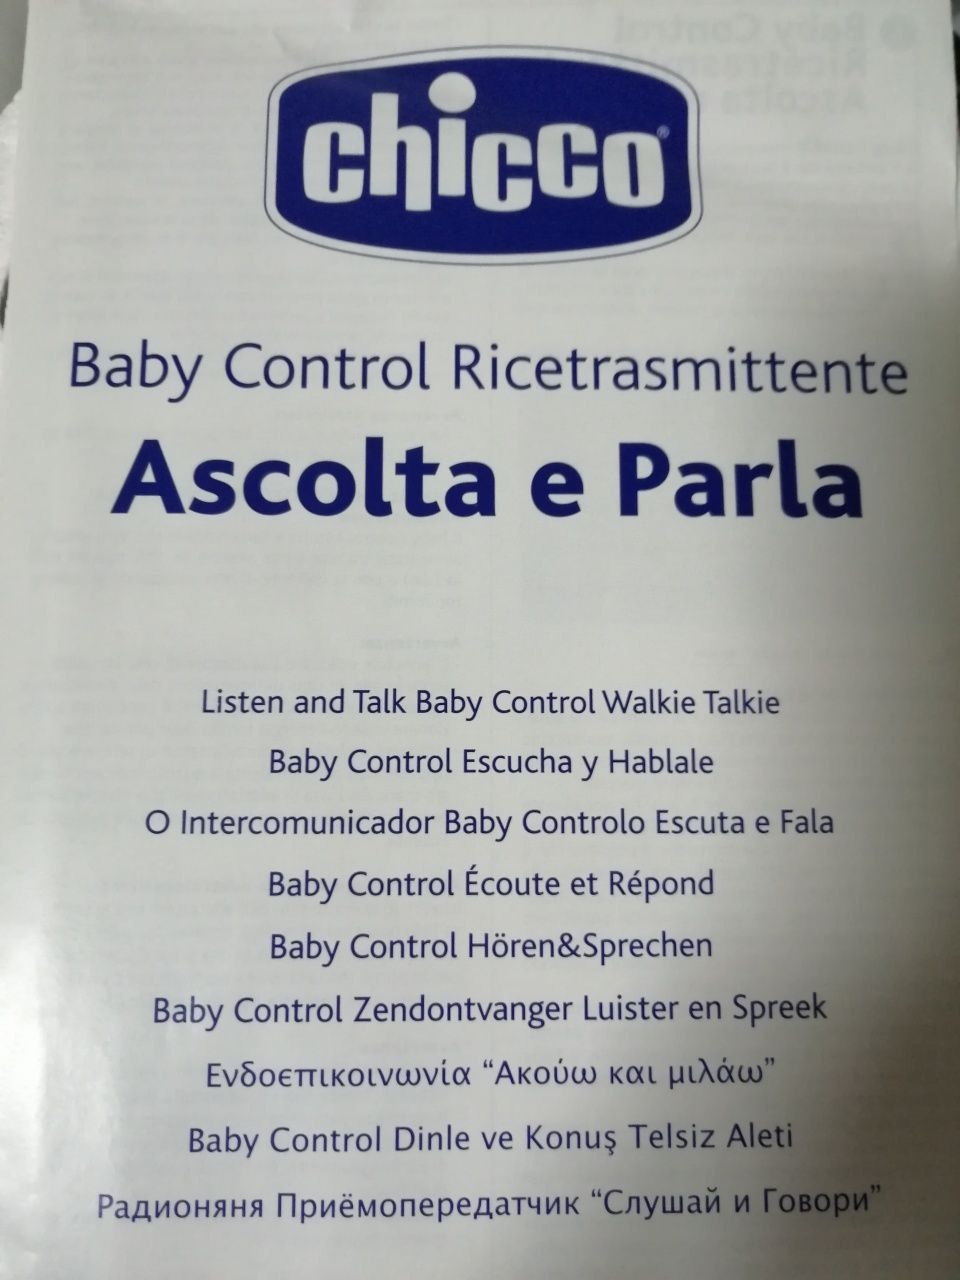 Baby control walkie talkie Chicco